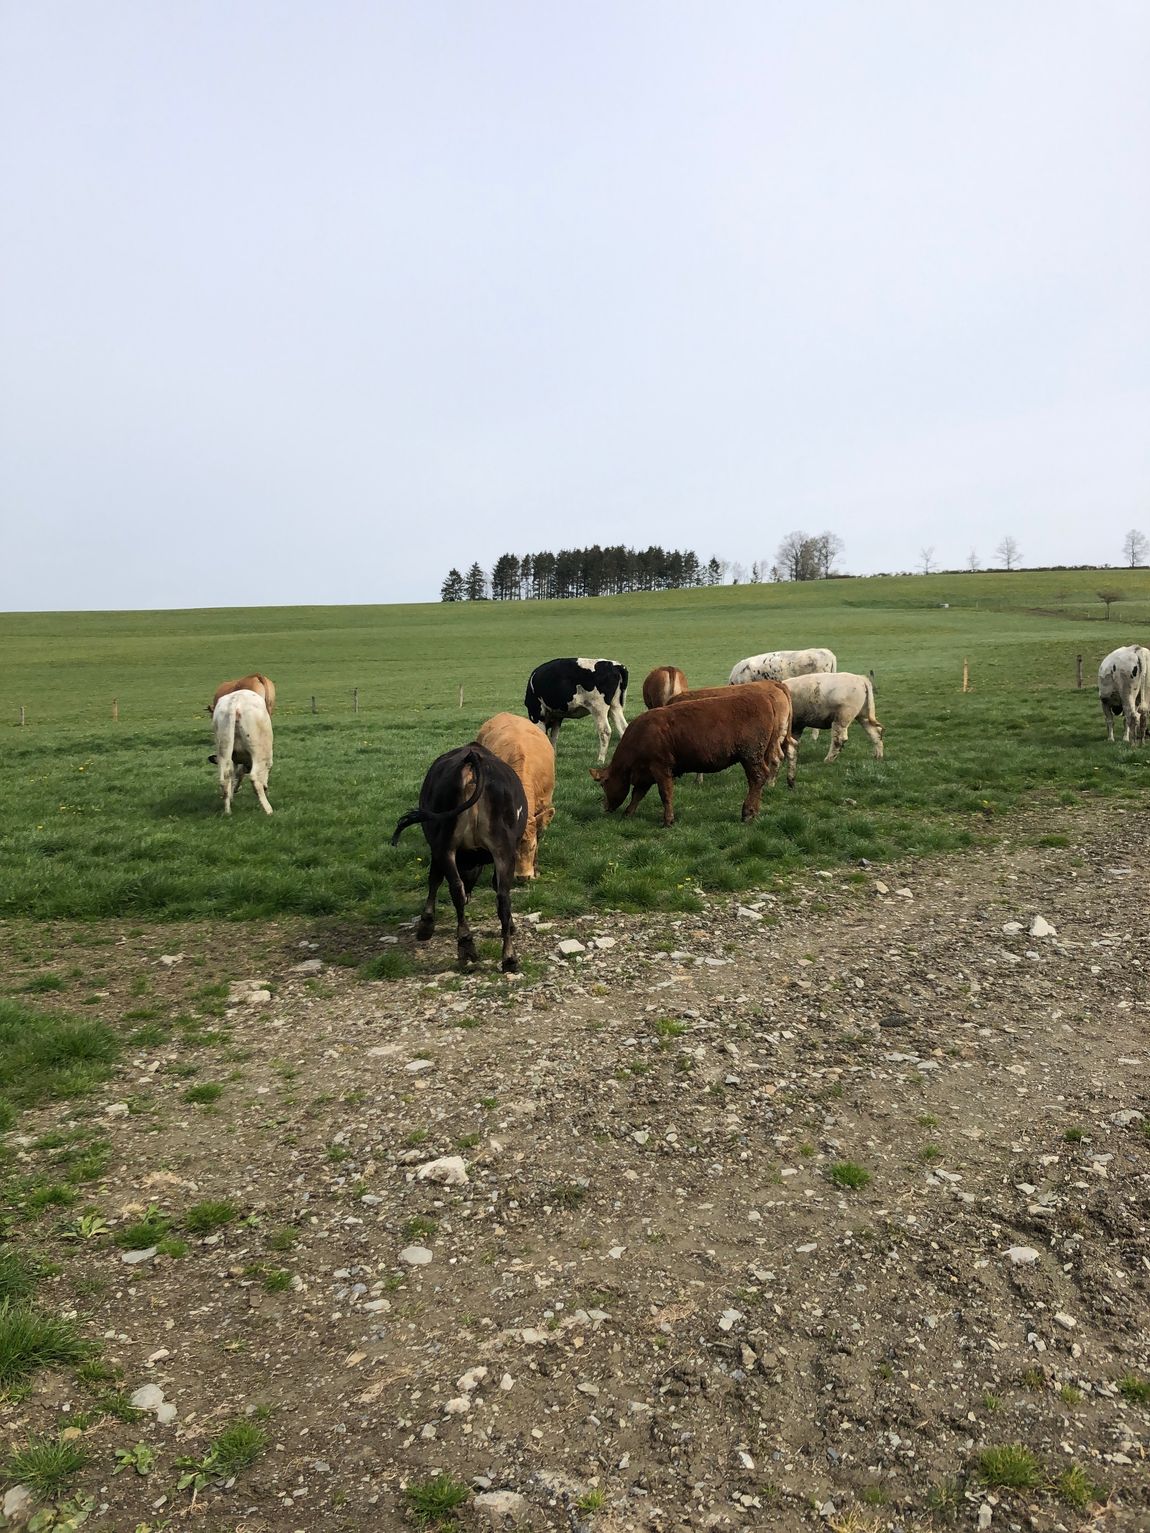 Enjoy country life on the farm in Sauerland